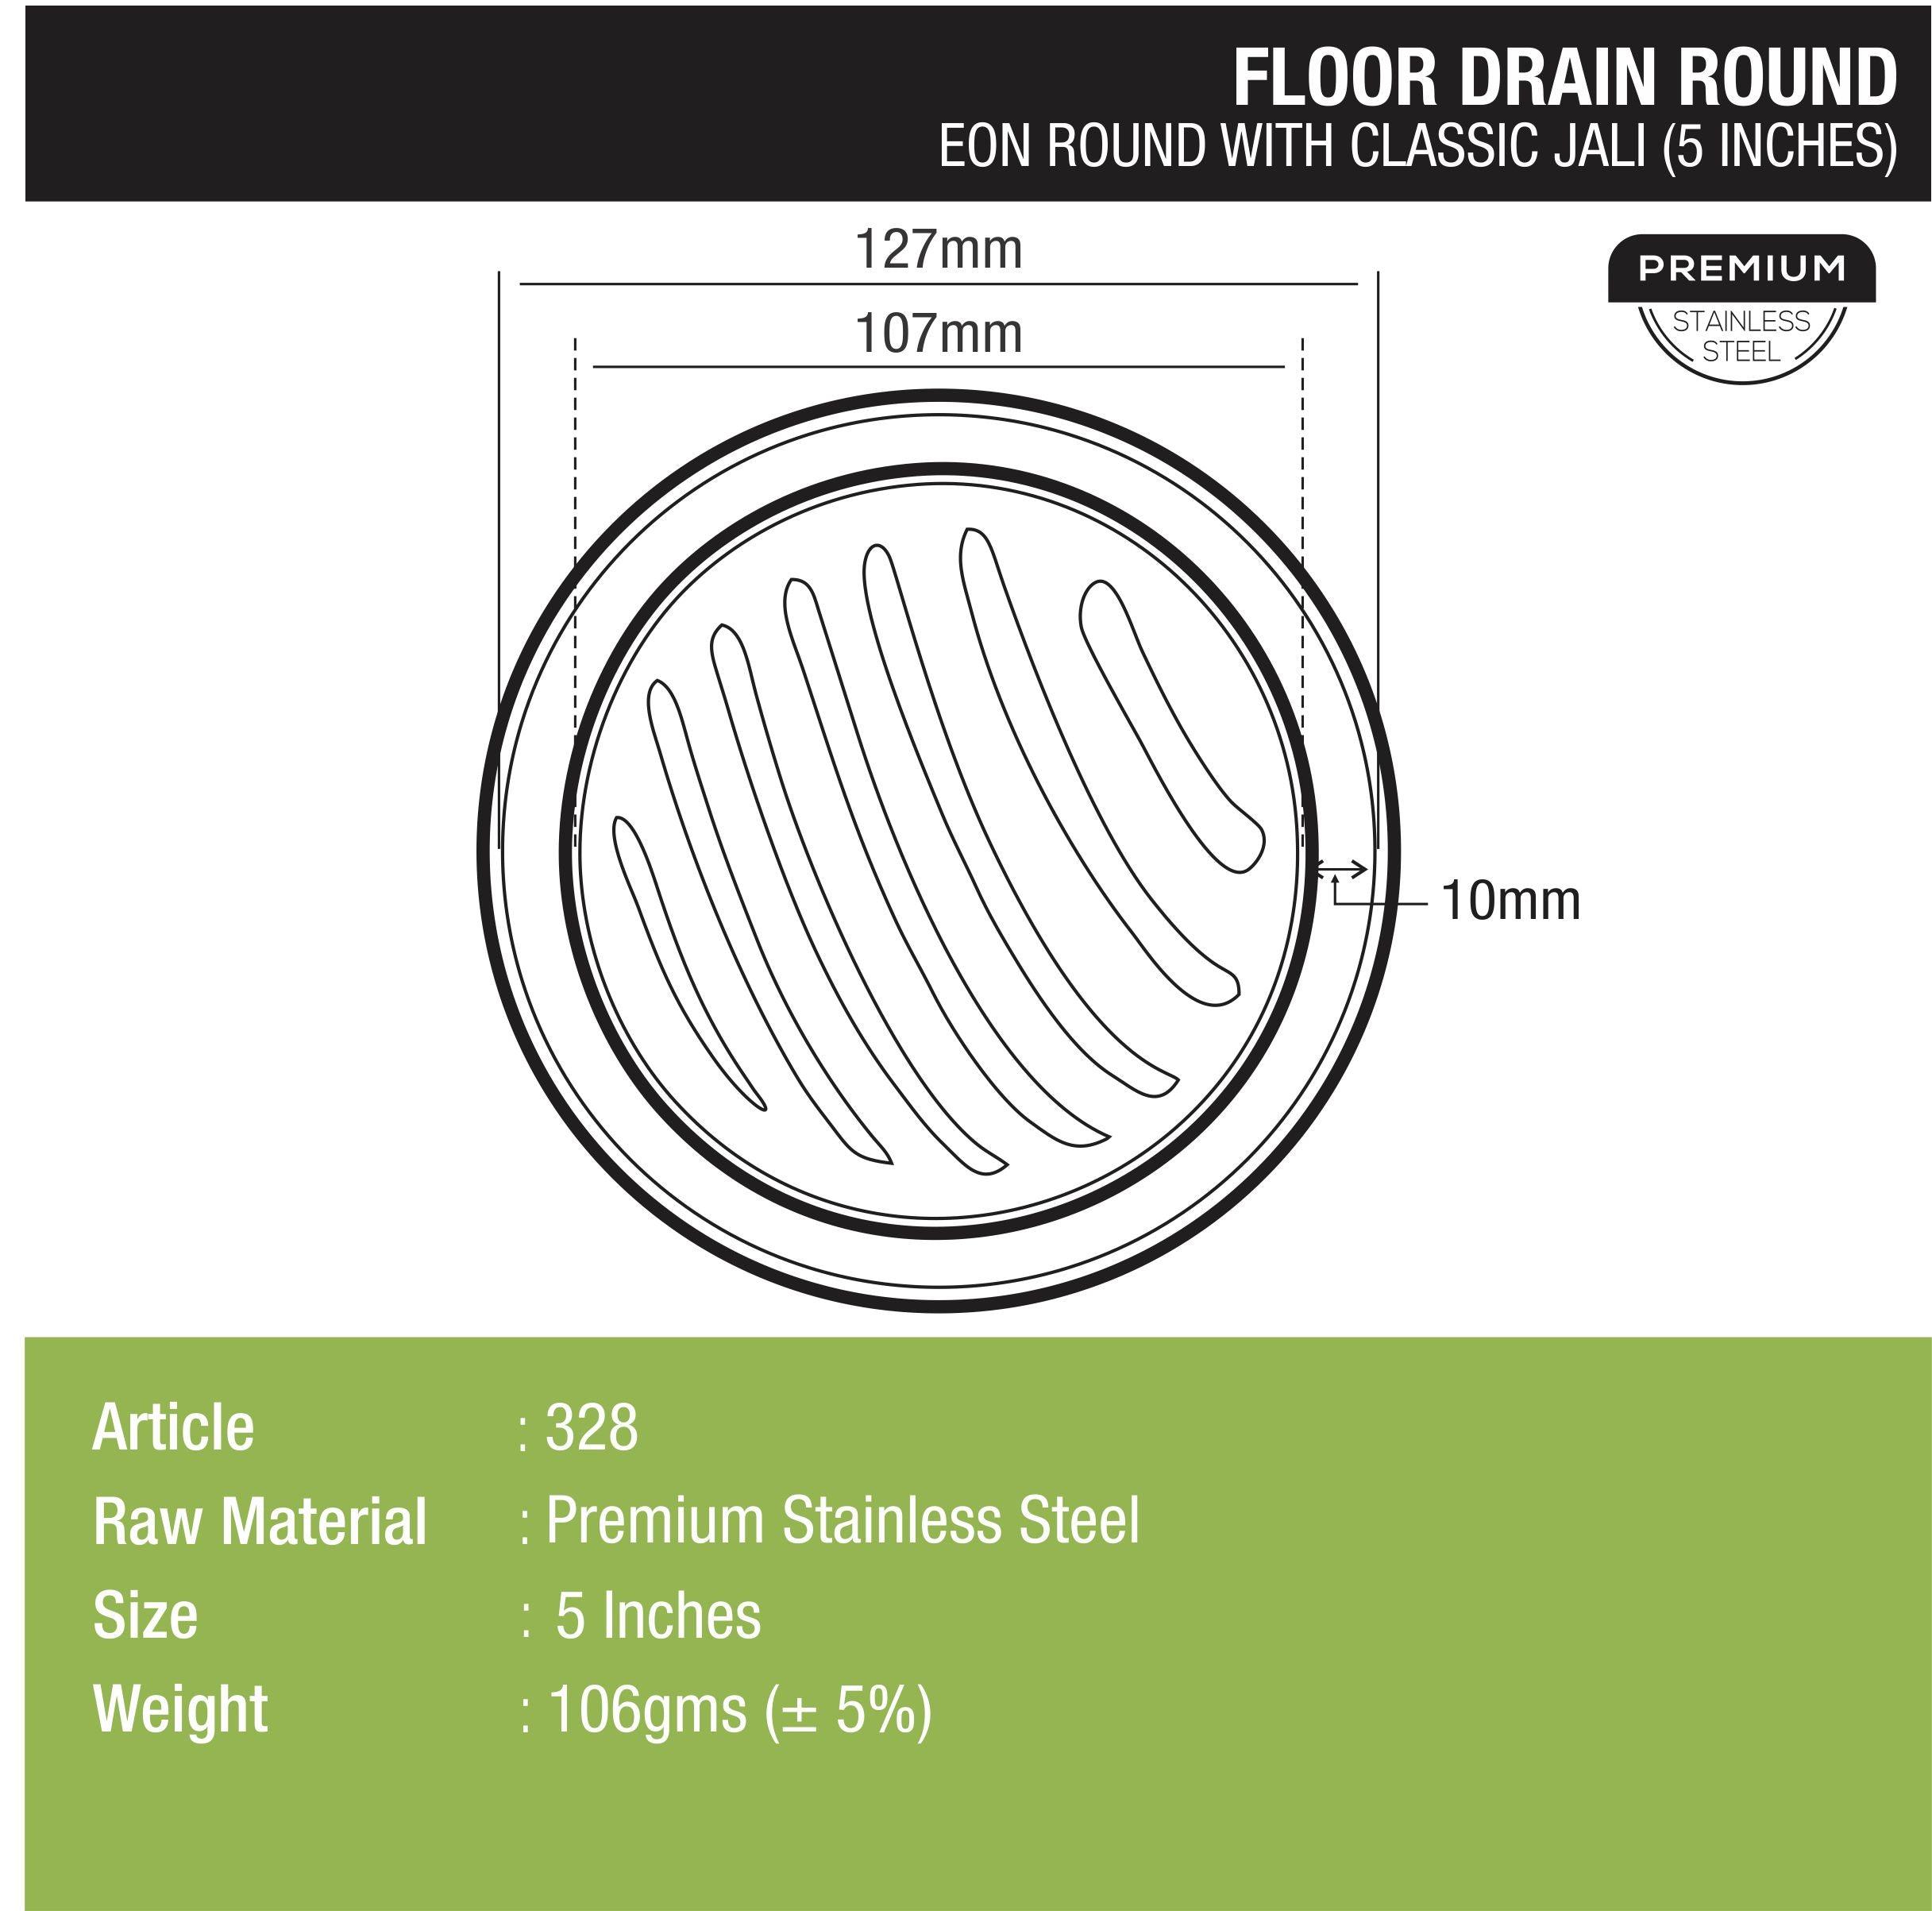 Eon Round Floor Drain with Classic Jali (5 inches) - LIPKA